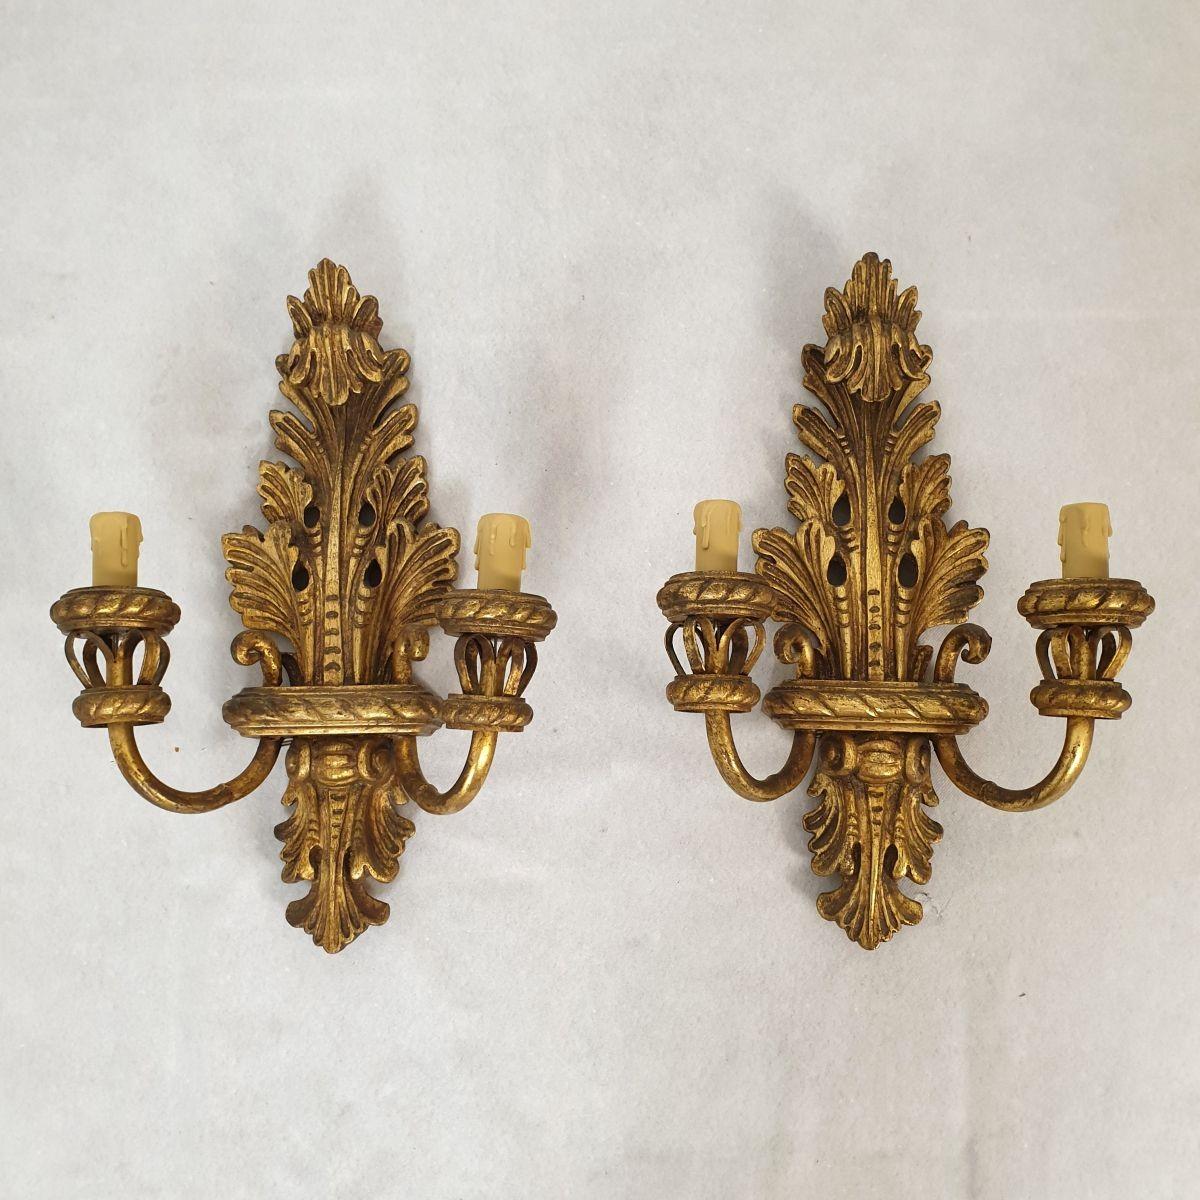 Pair of antique gilt wood wall sconces, France 1920's.
The sconces have a large size and are in excellent condition.
They are made of git wood, carved with a neoclassical decor and style.
The arms are made in gilt iron.
Each sconce has 2 lights and